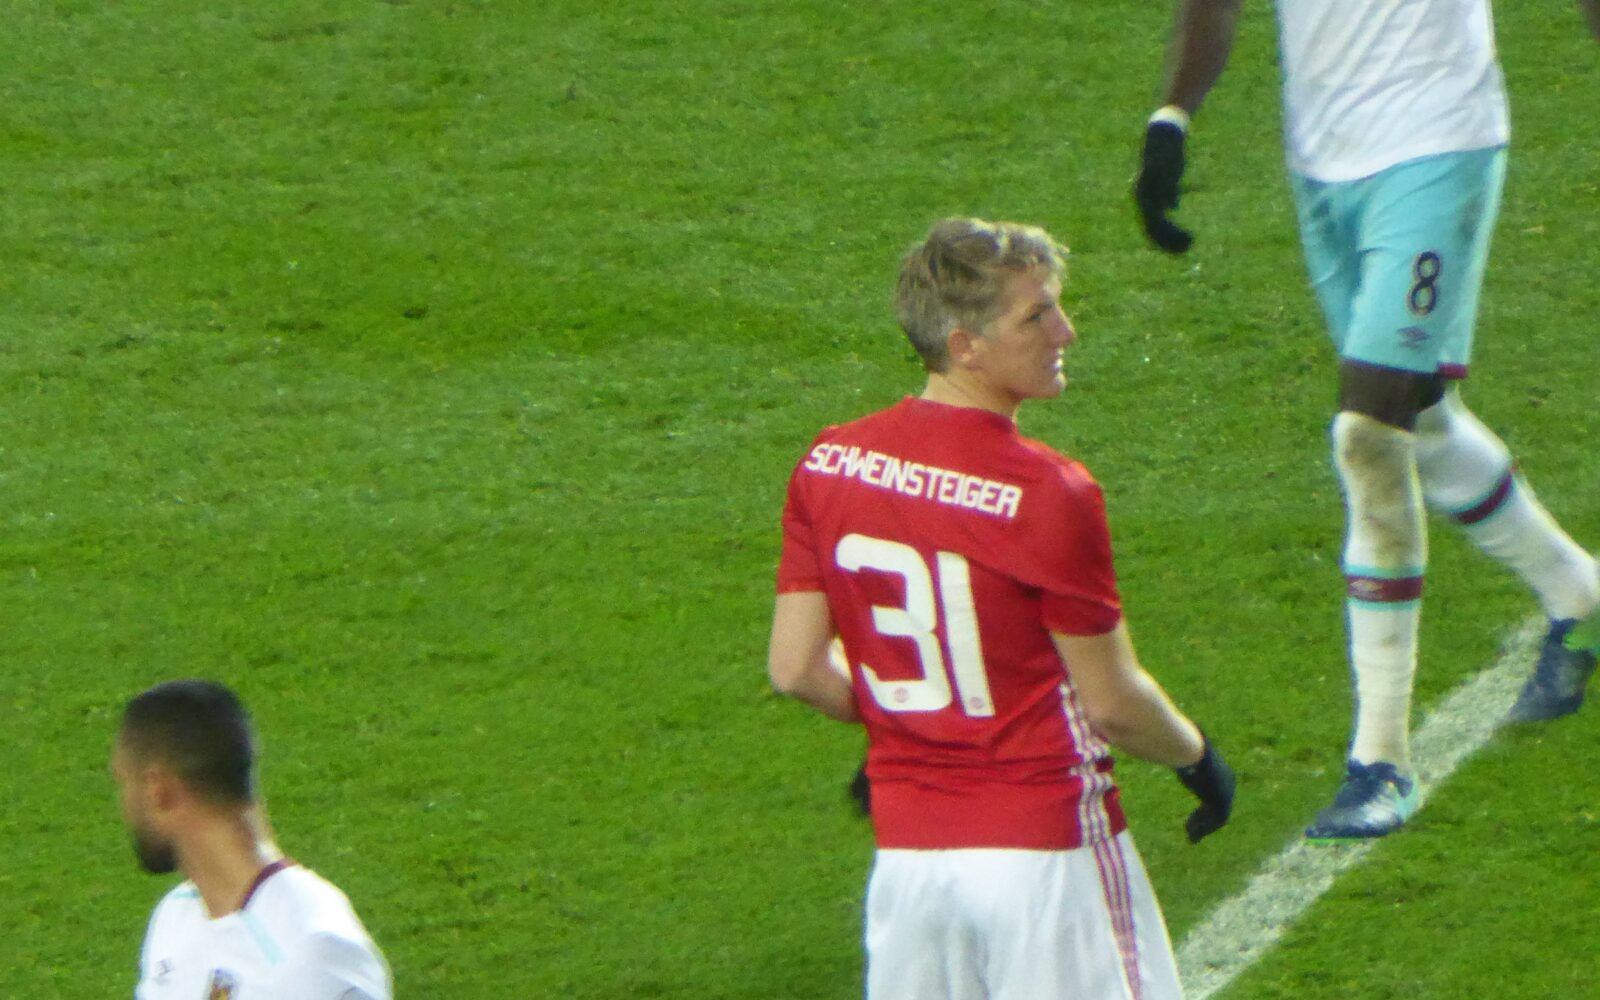 how many times did schweinsteiger play for man united?